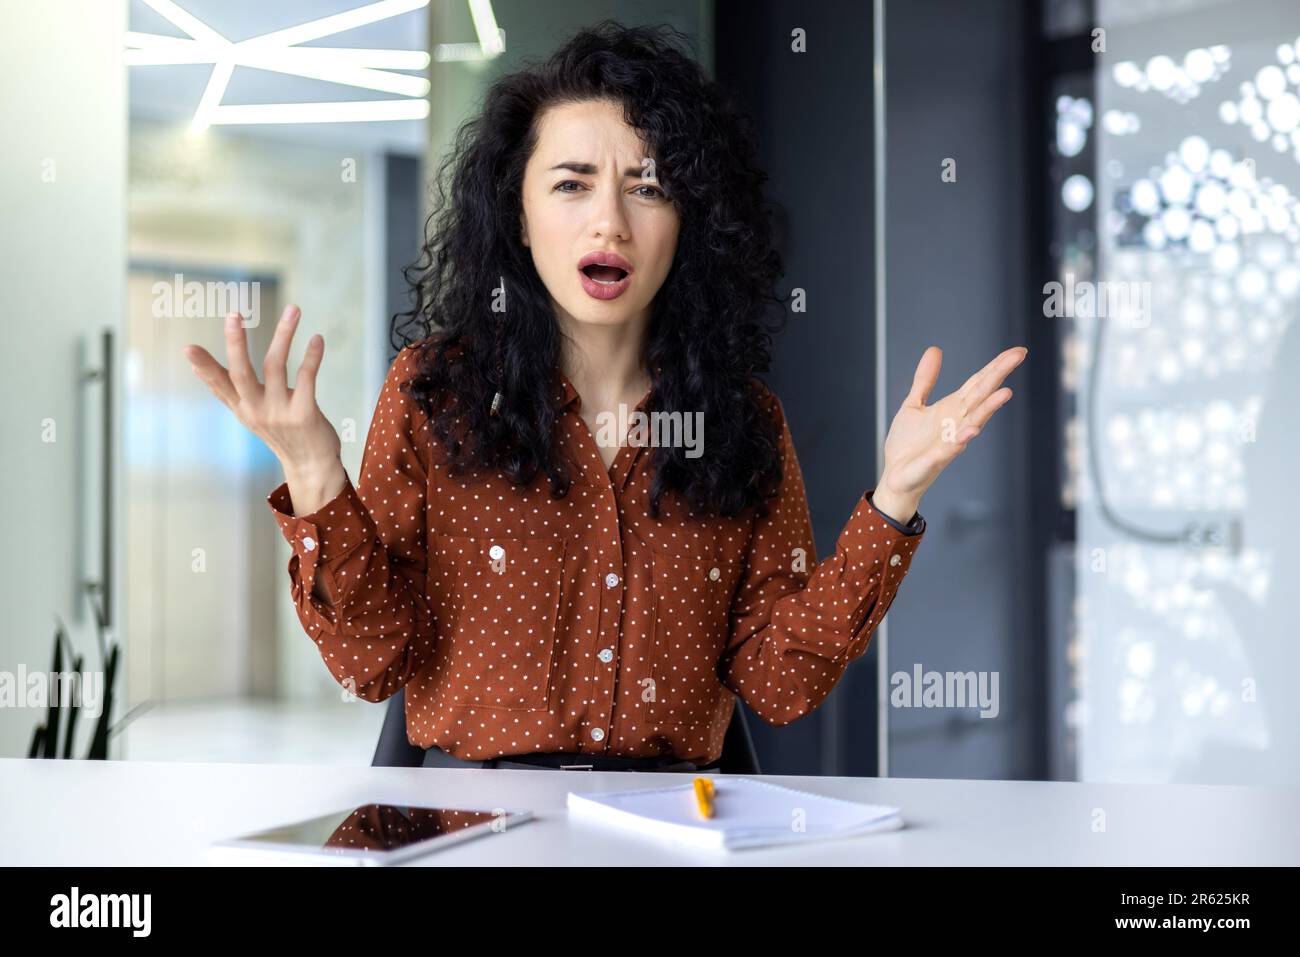 Angry and angry business woman inside office at workplace, latina woman yelling at camera, boss talking displeased with employees remotely online meeting video call. Stock Photo